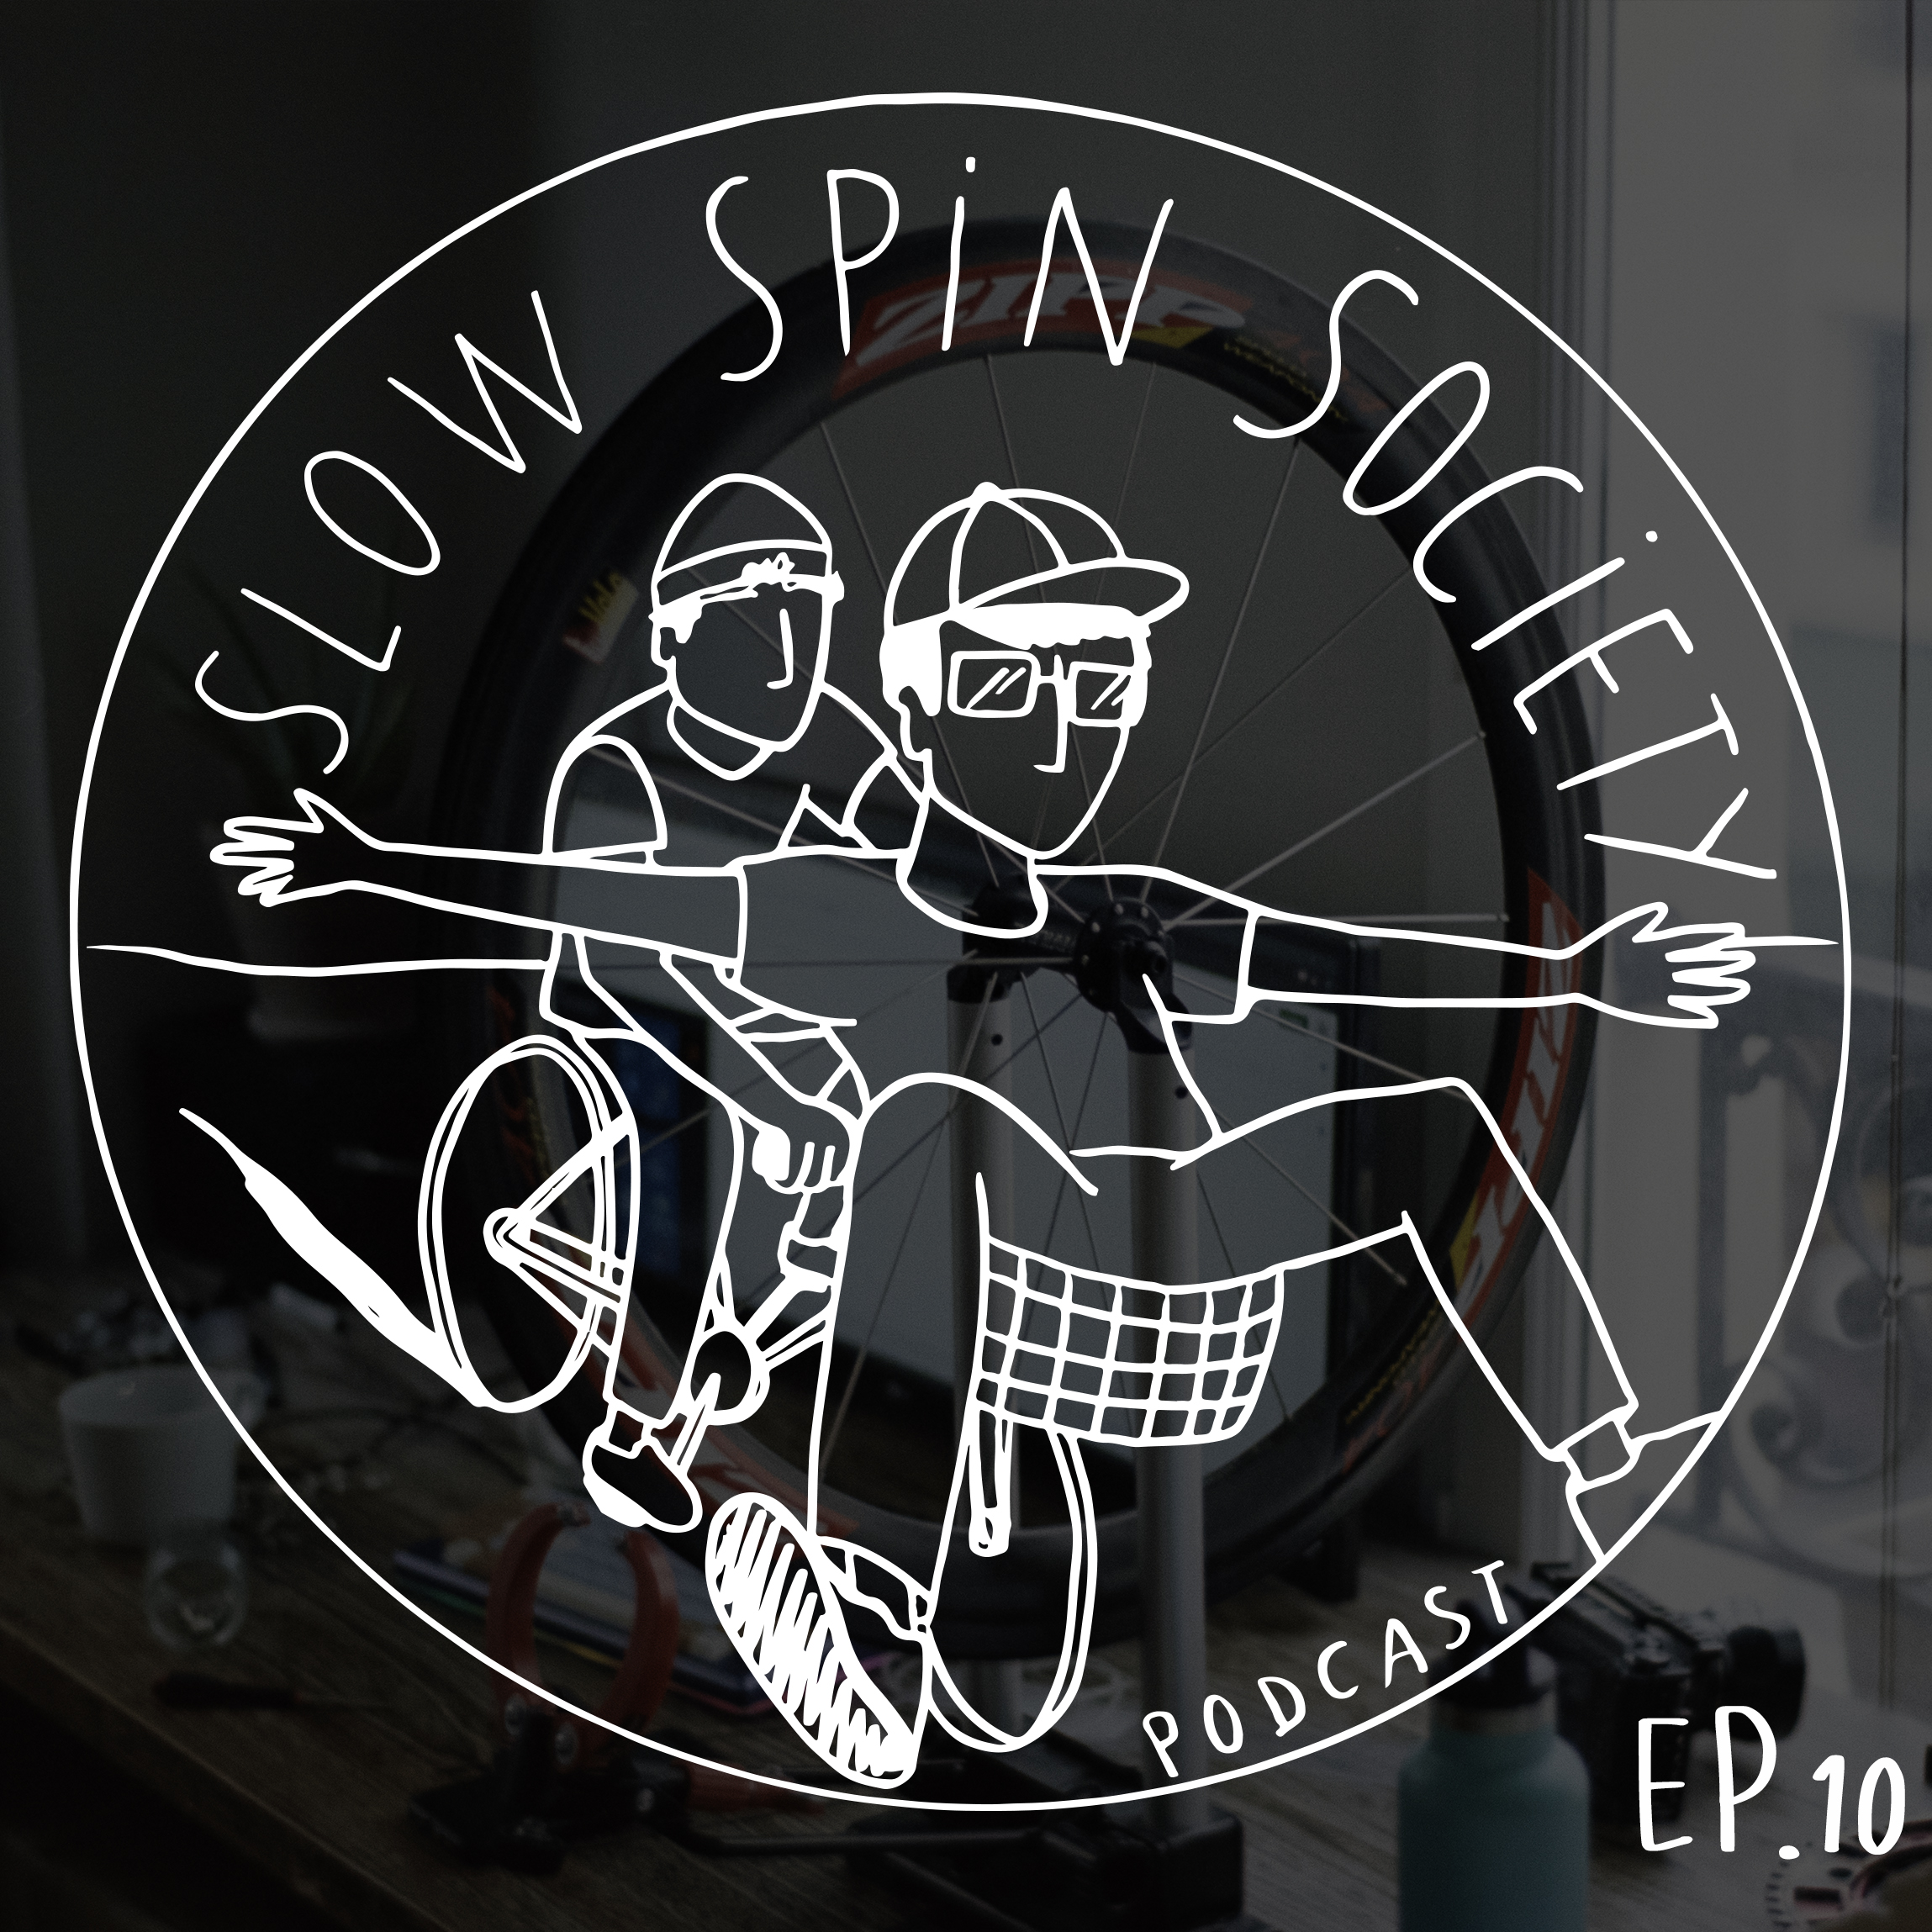 The Slow Spin Society Podcast Ep.10 : Is Wheel Building for You?